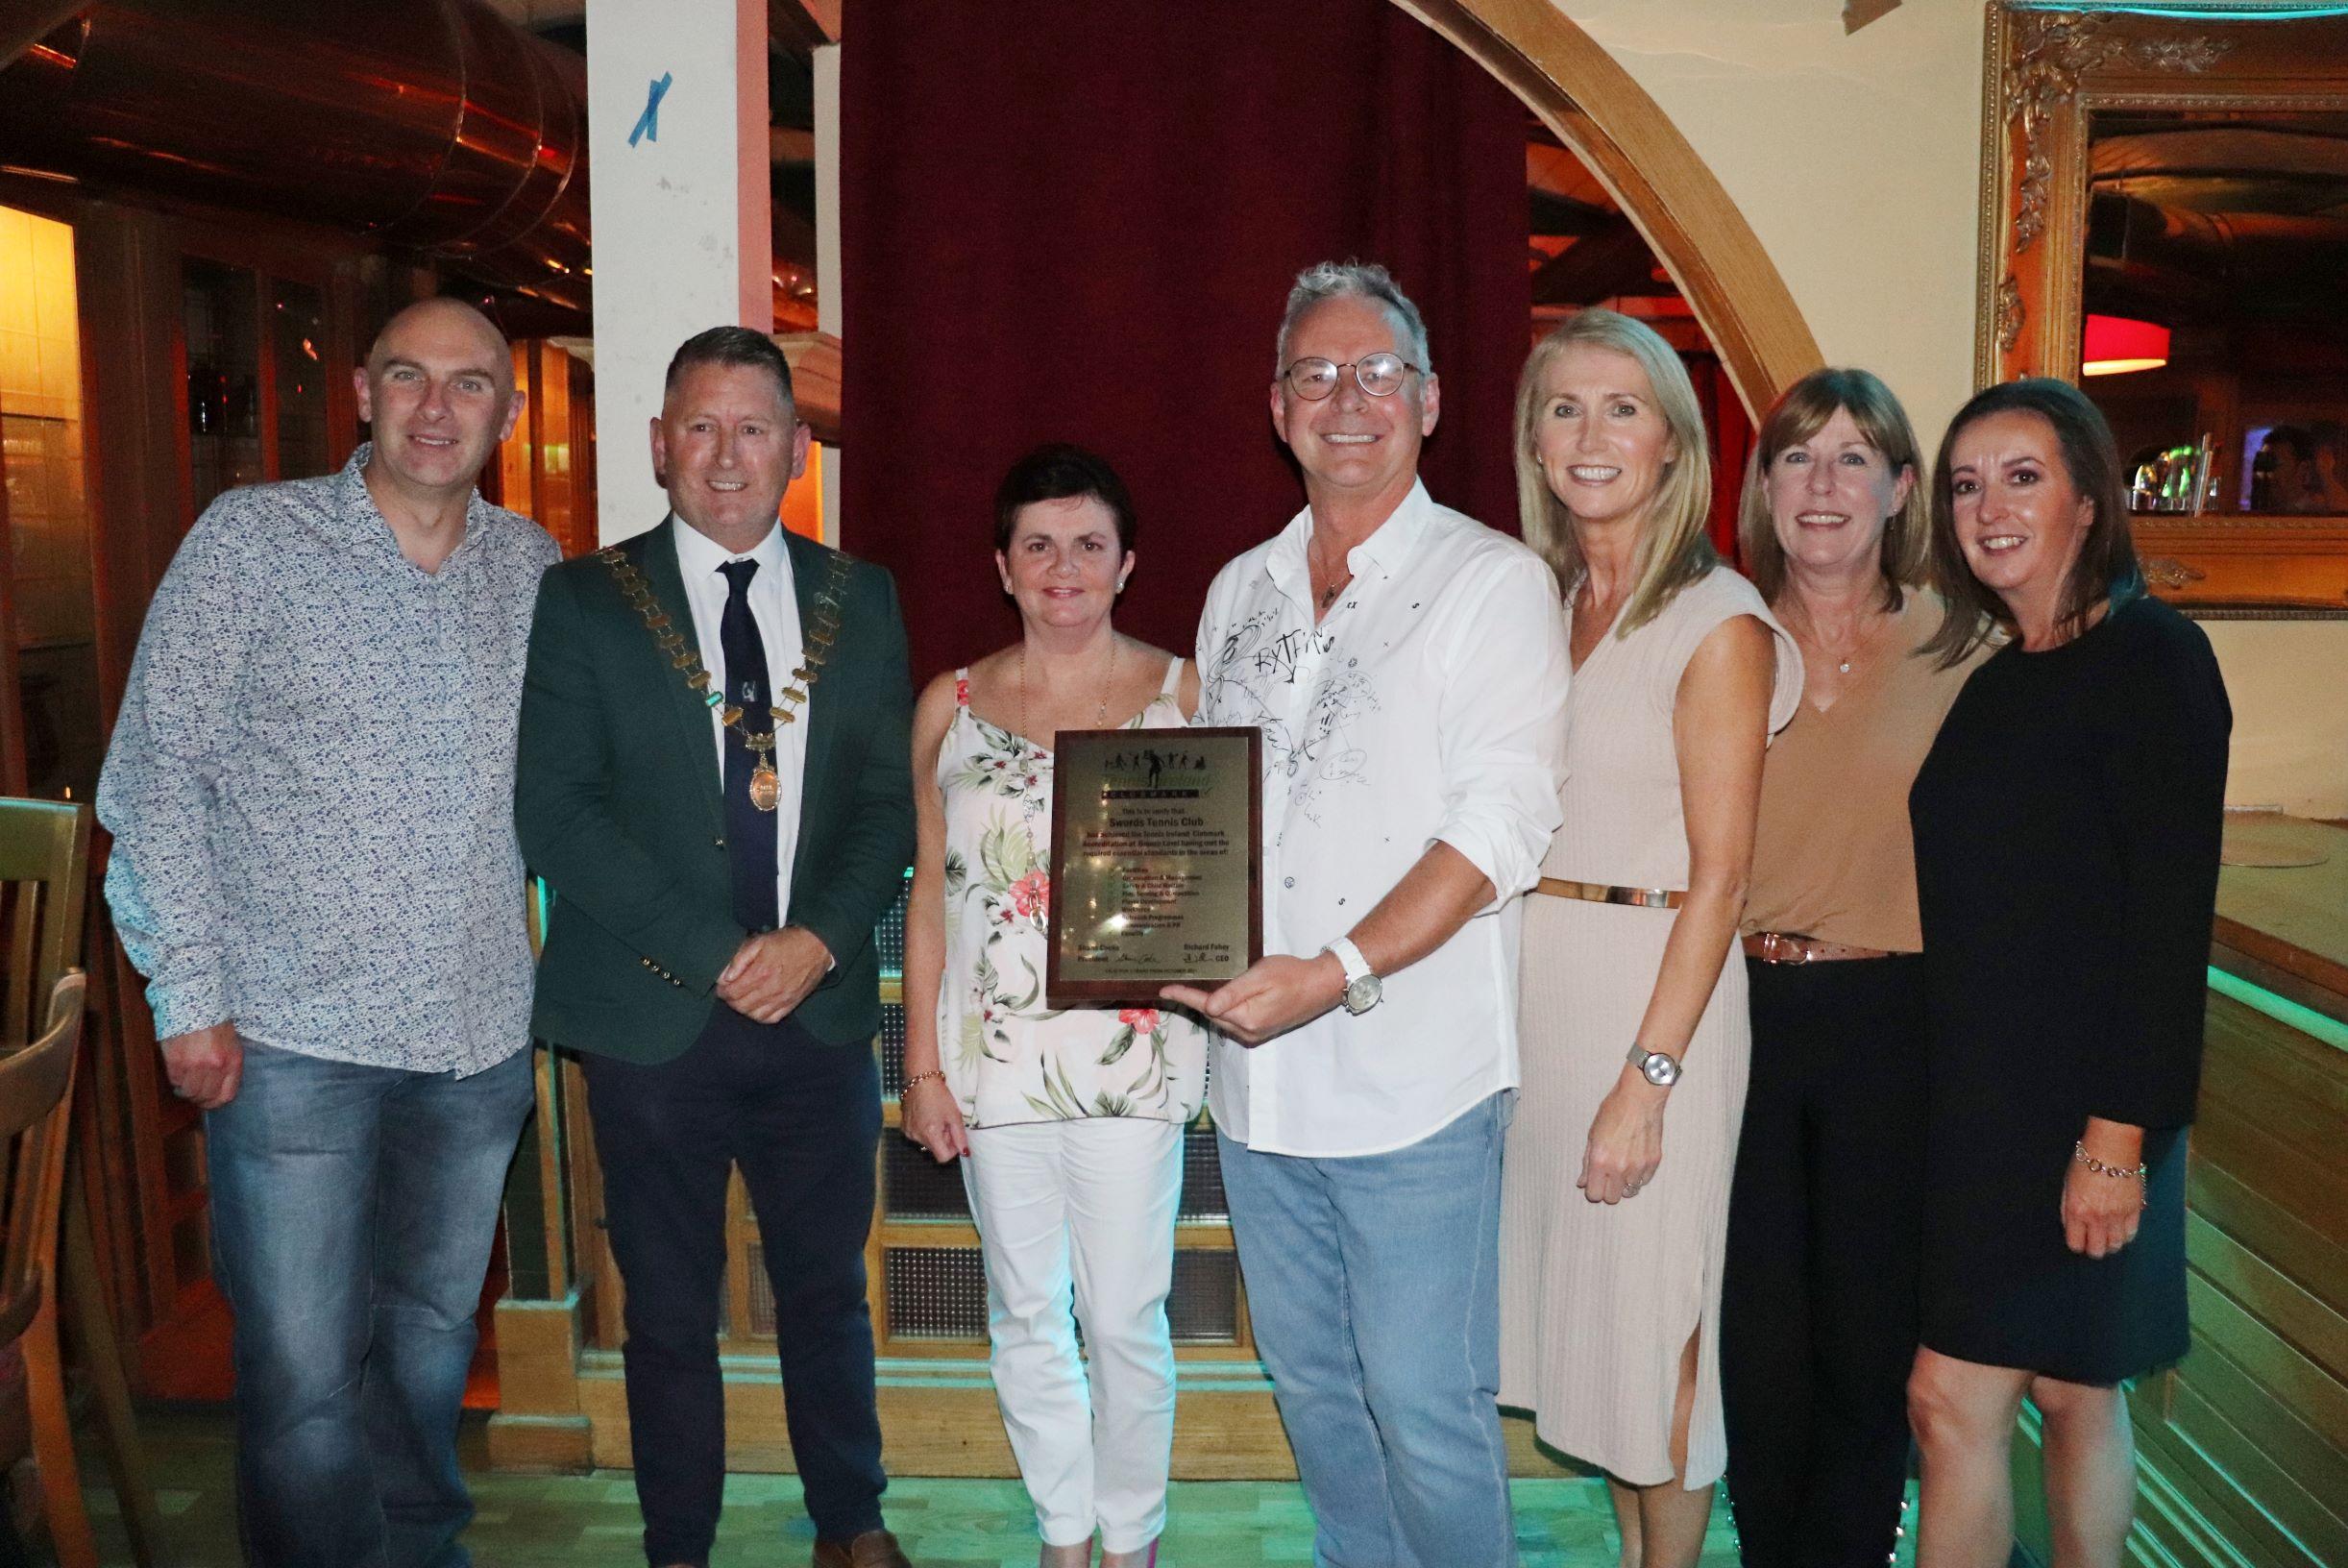 Swords tennis Club Award Chairperson Committee and TI President Nov 2021 